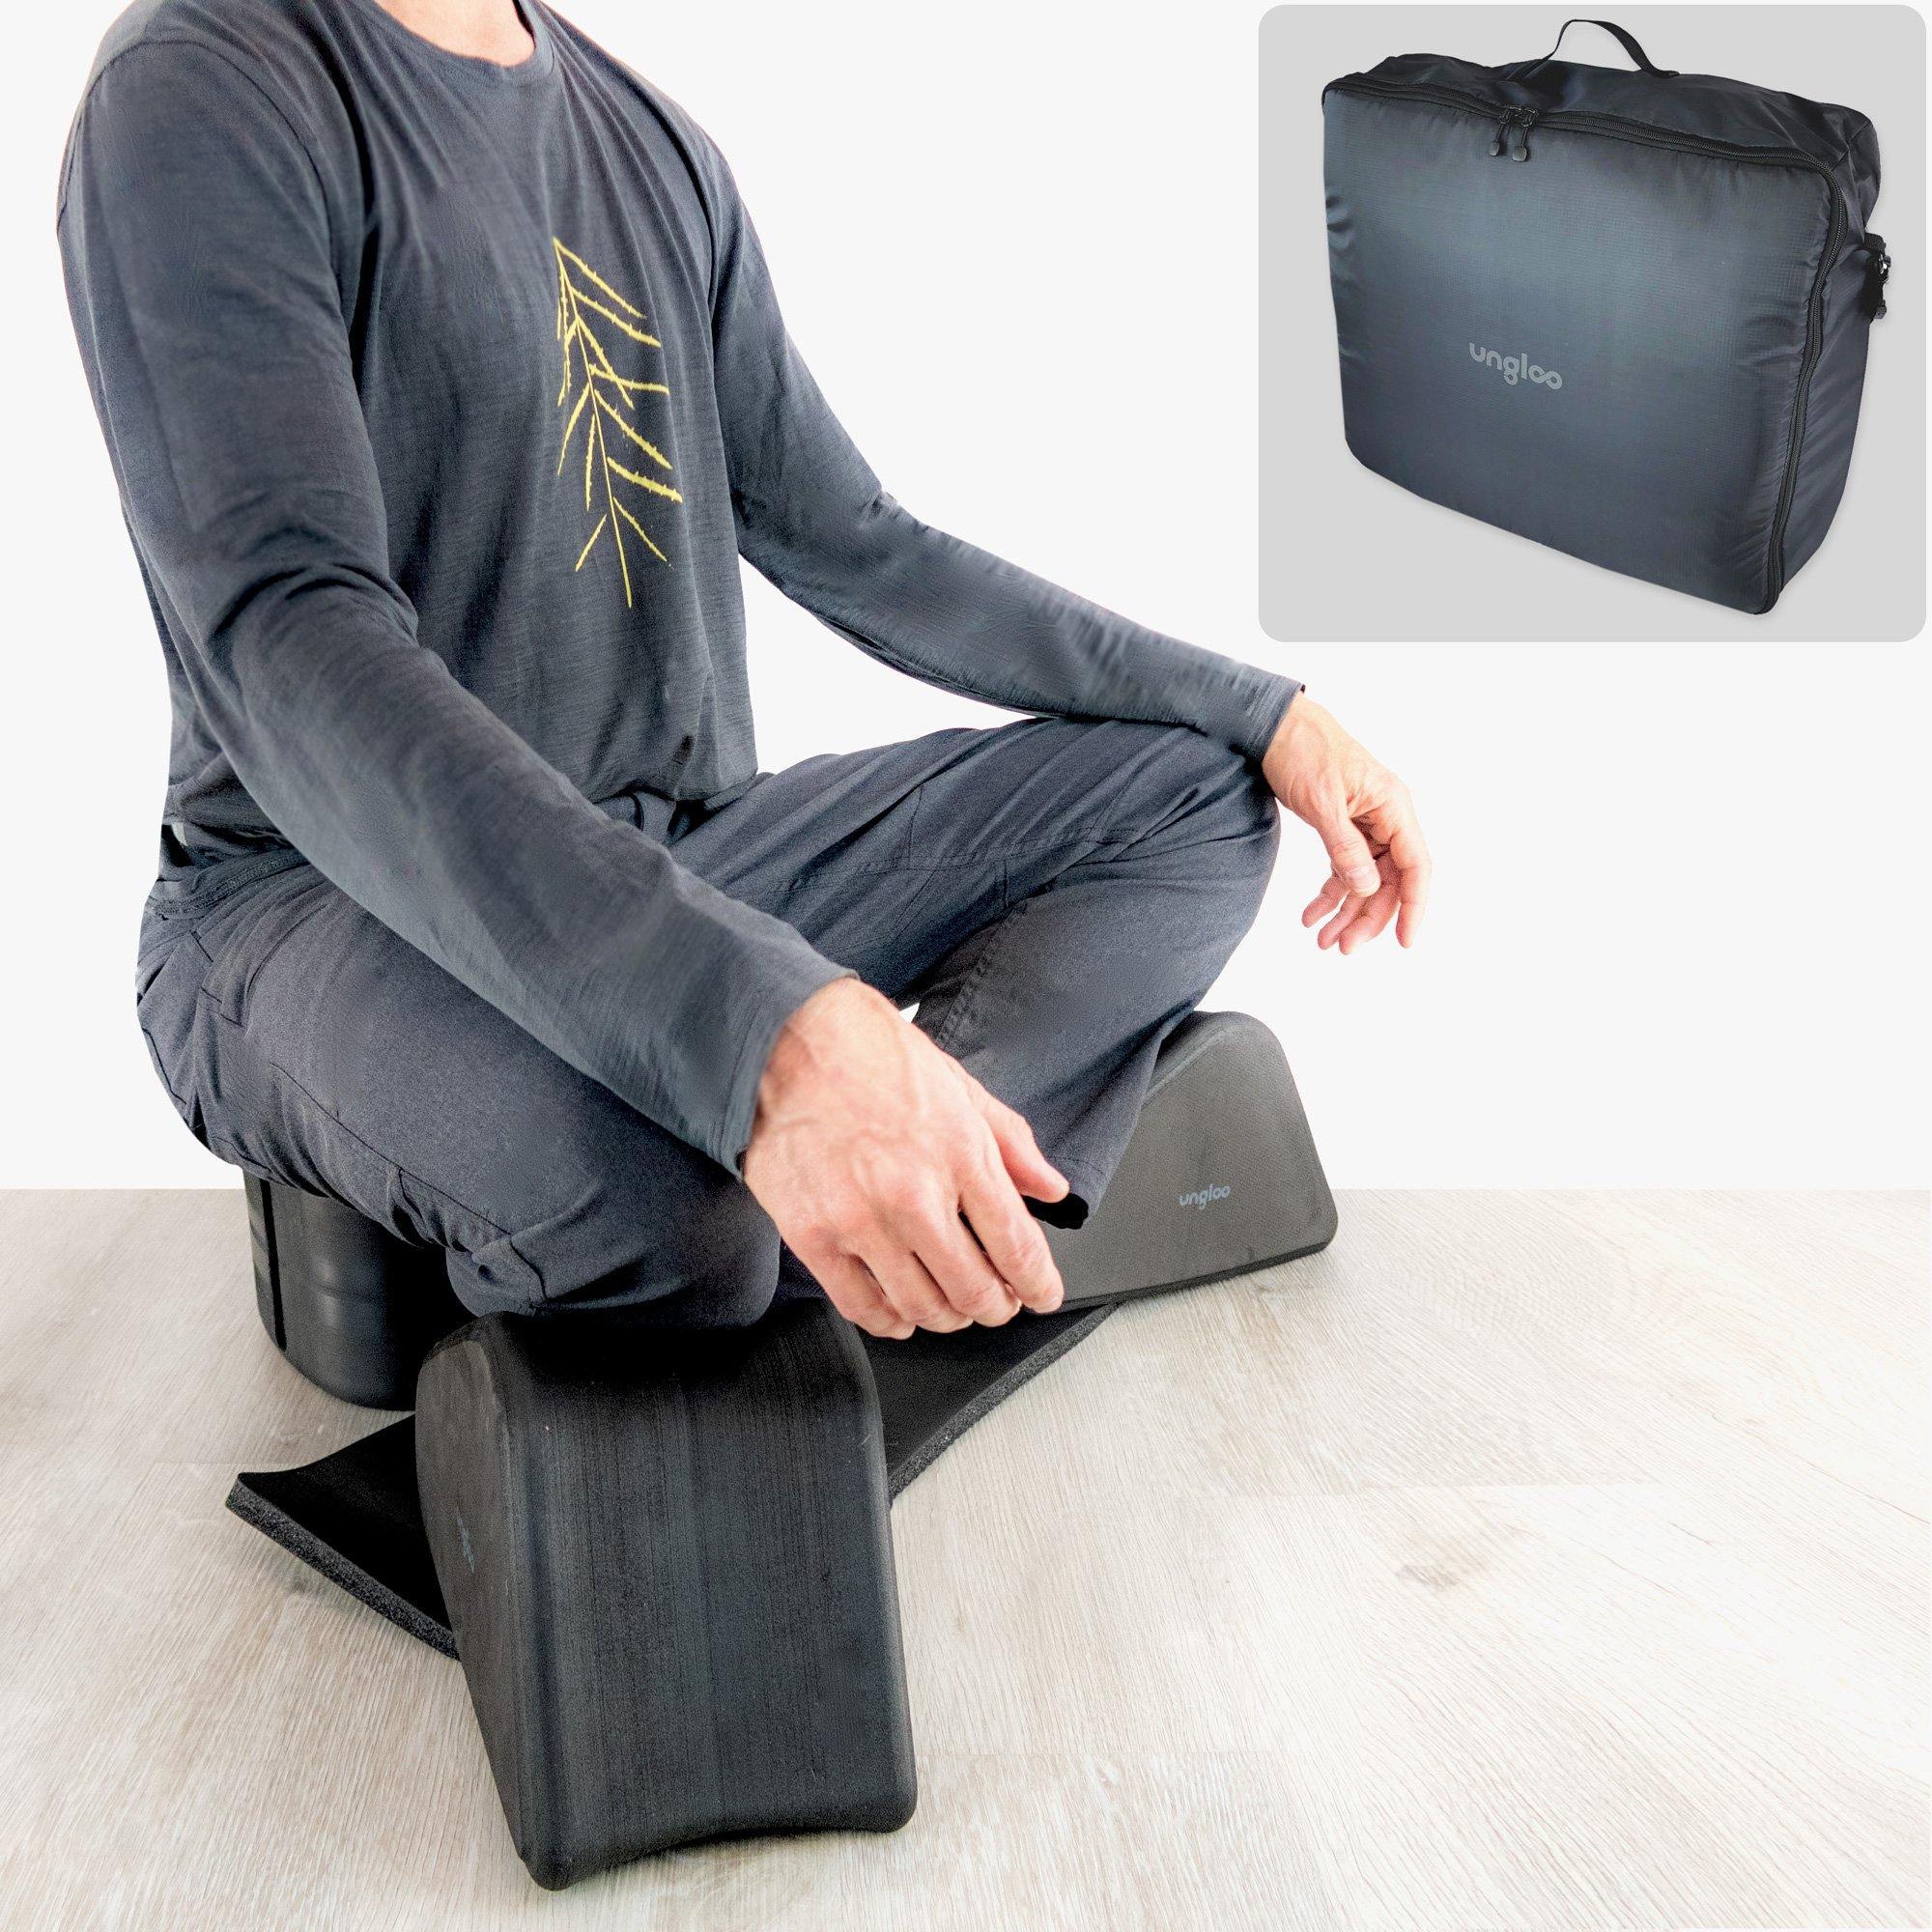 SIT3 Meditation Kit being used in a cross legged position